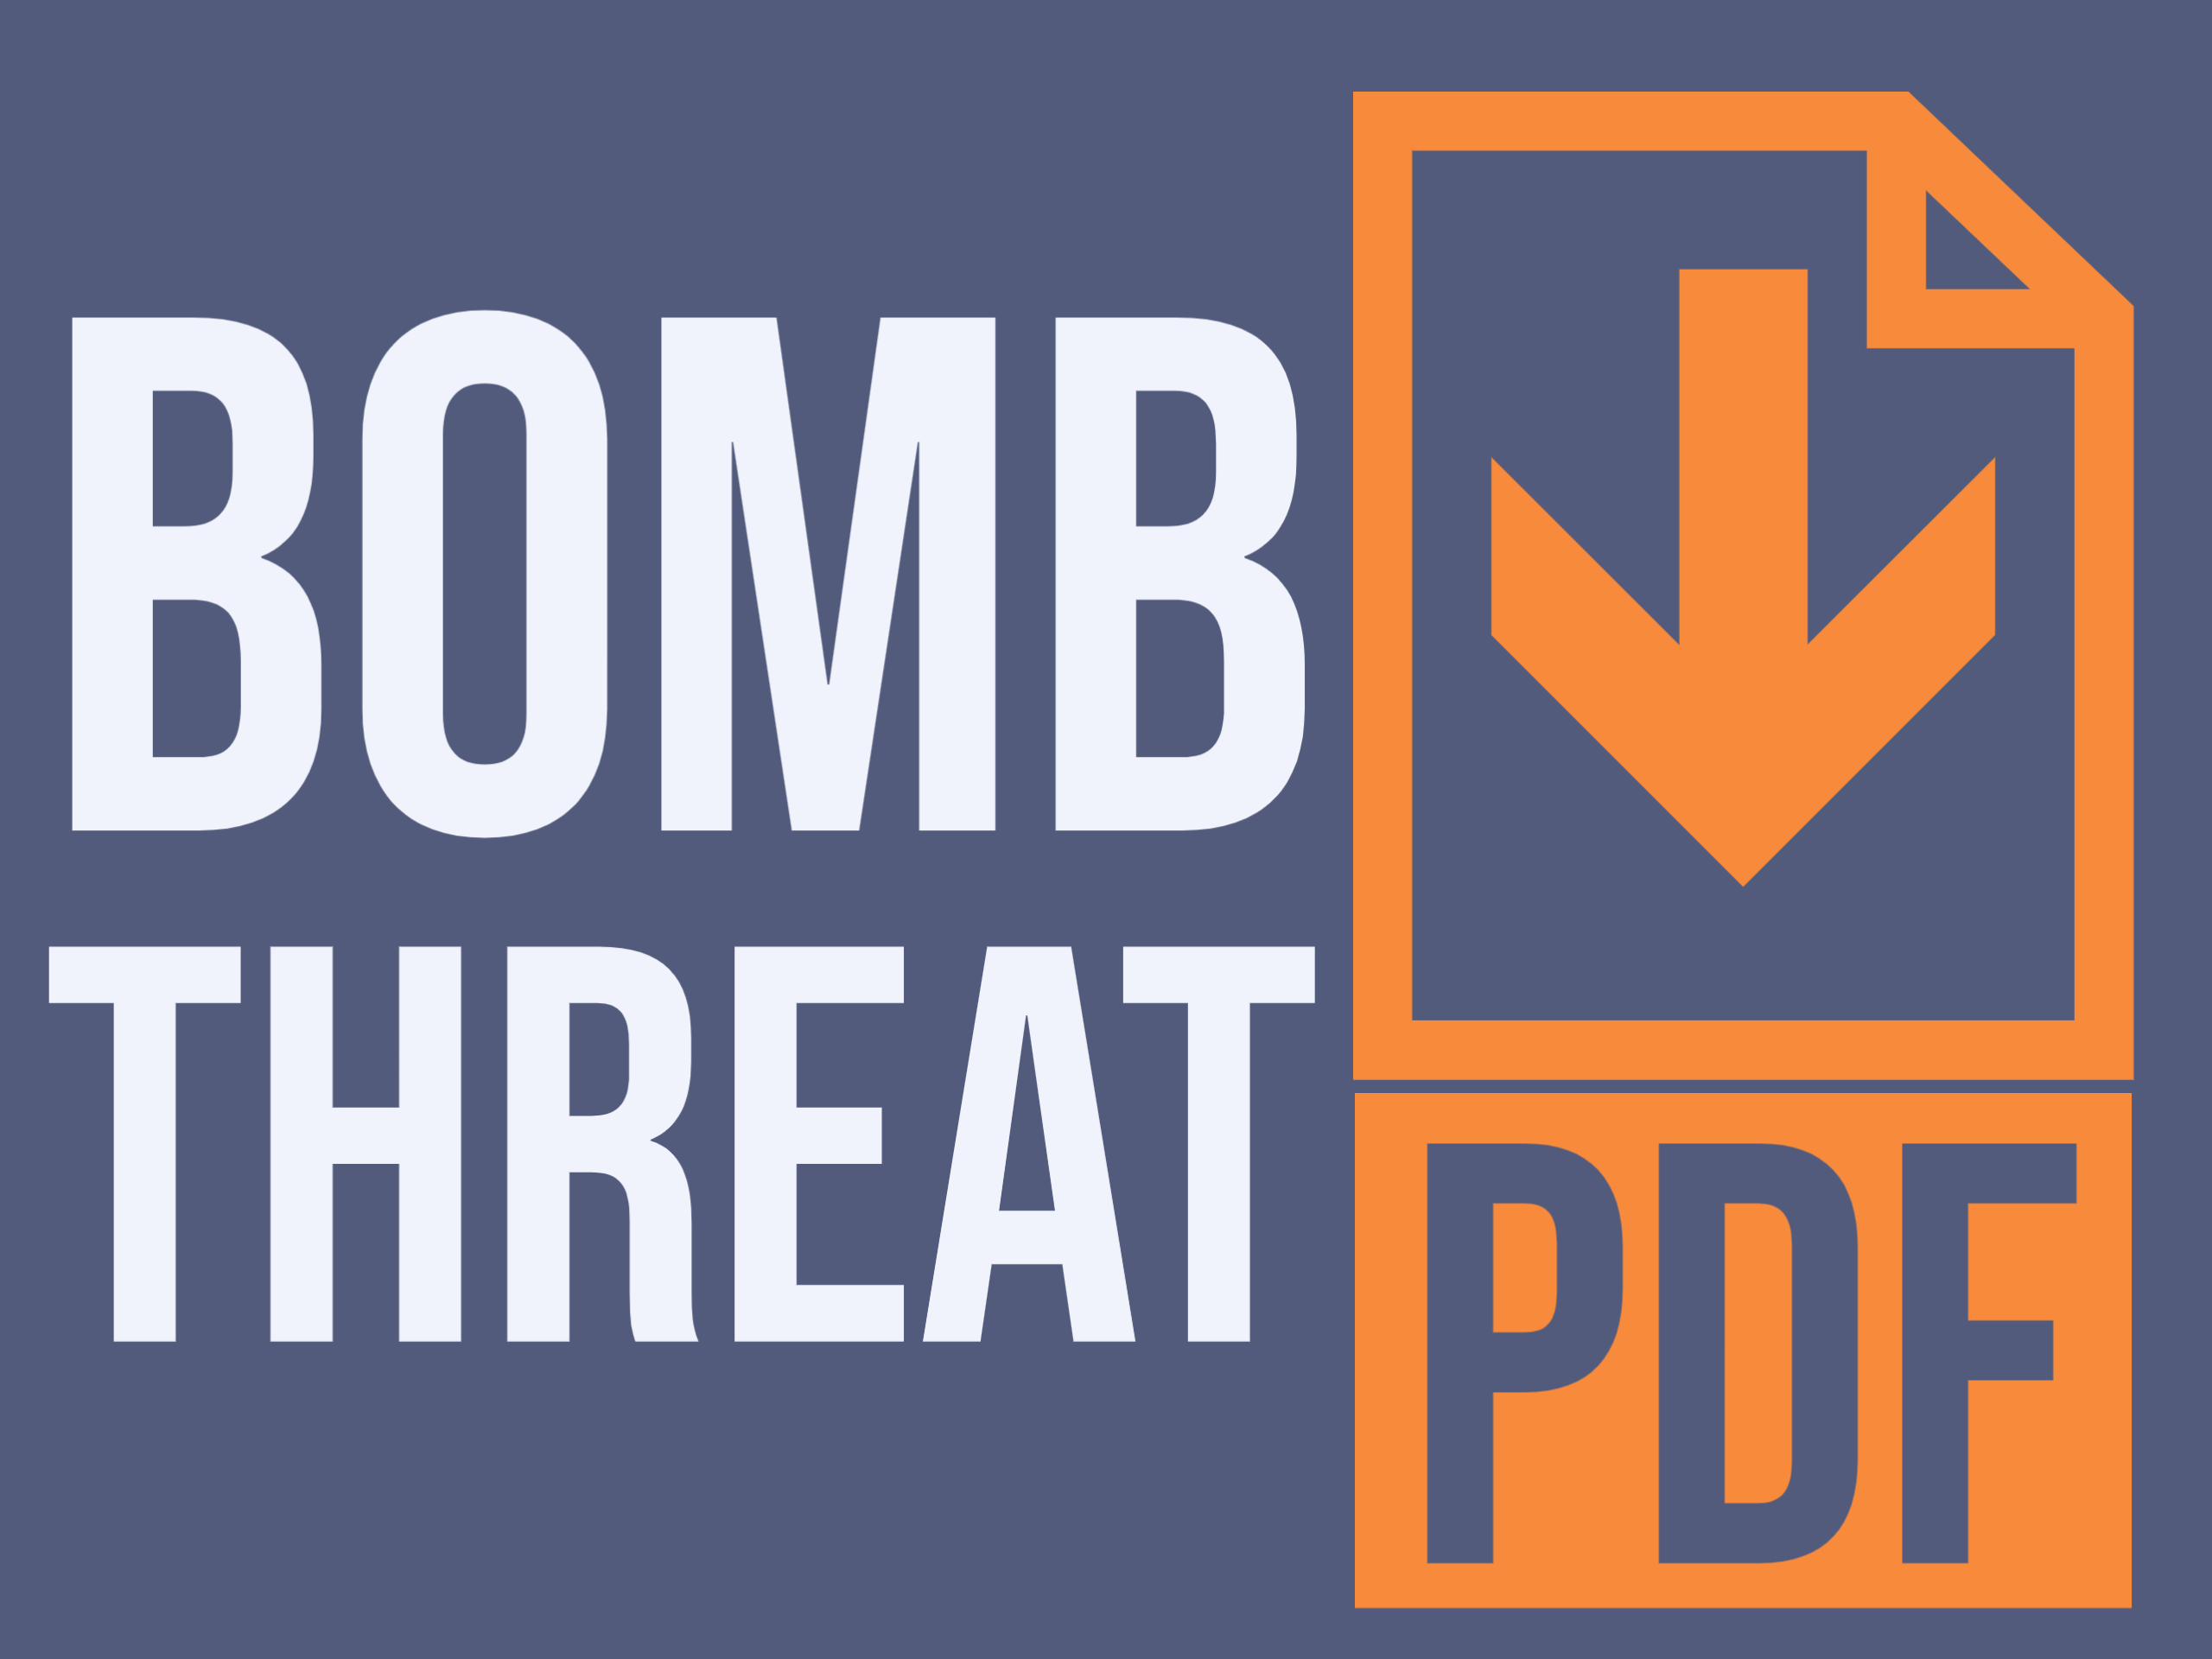 Bomb threat template. Add a bomb threat security assignment instruction or SOP.  Be prepared to deal with a bomb threat being made to you or your organisation.